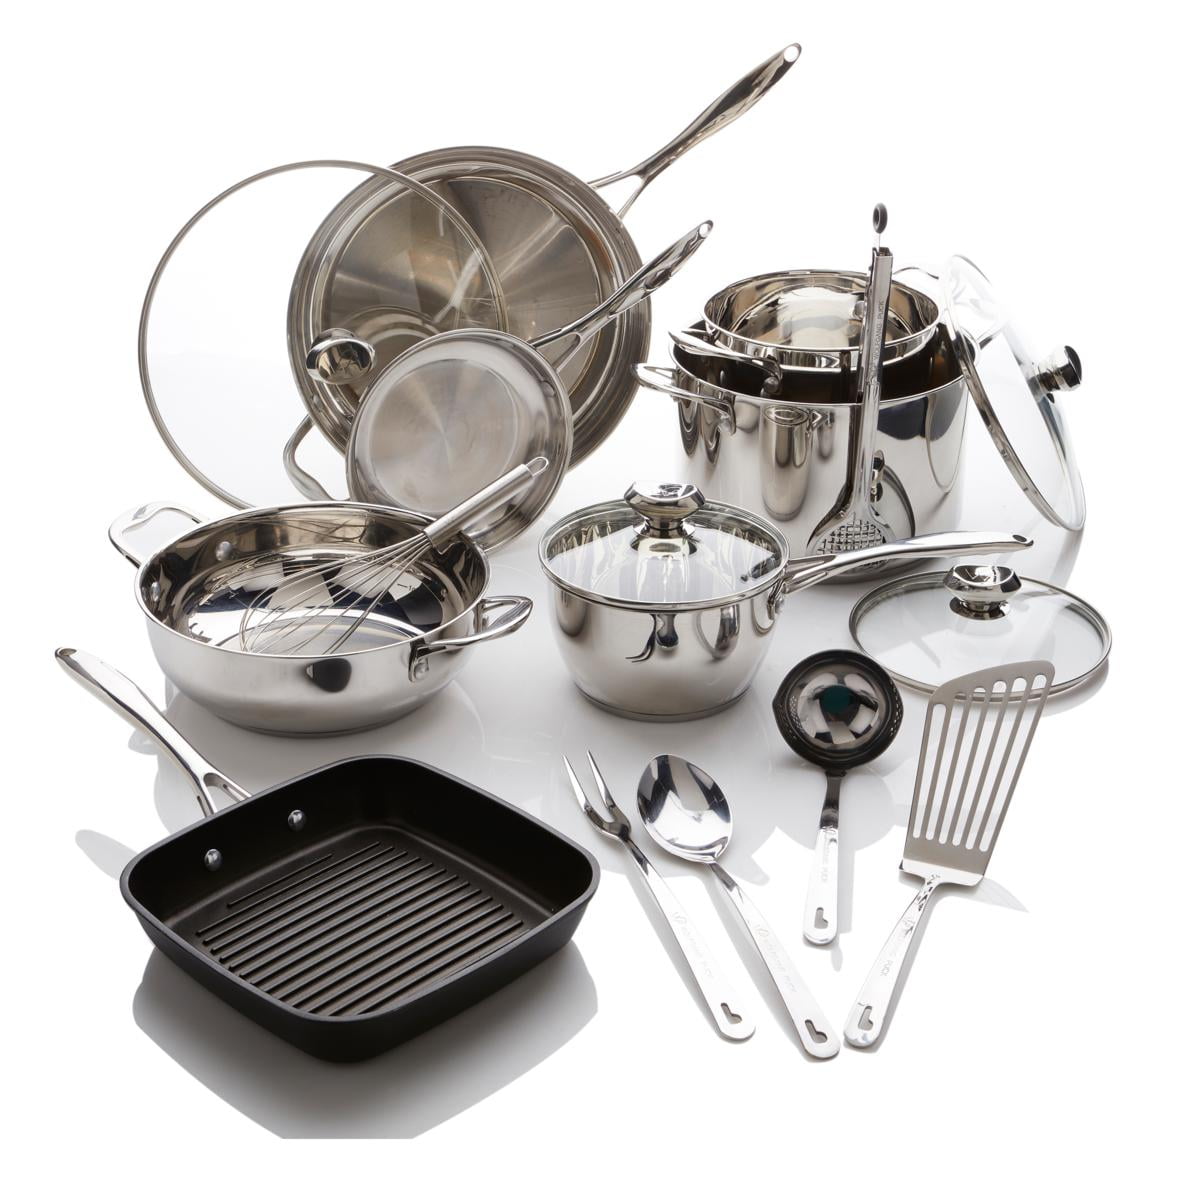 Wolfgang Puck Bistro Elite 17-piece Stainless Steel Cookware Set Wolfgang Puck Stainless Steel Cookware Sets